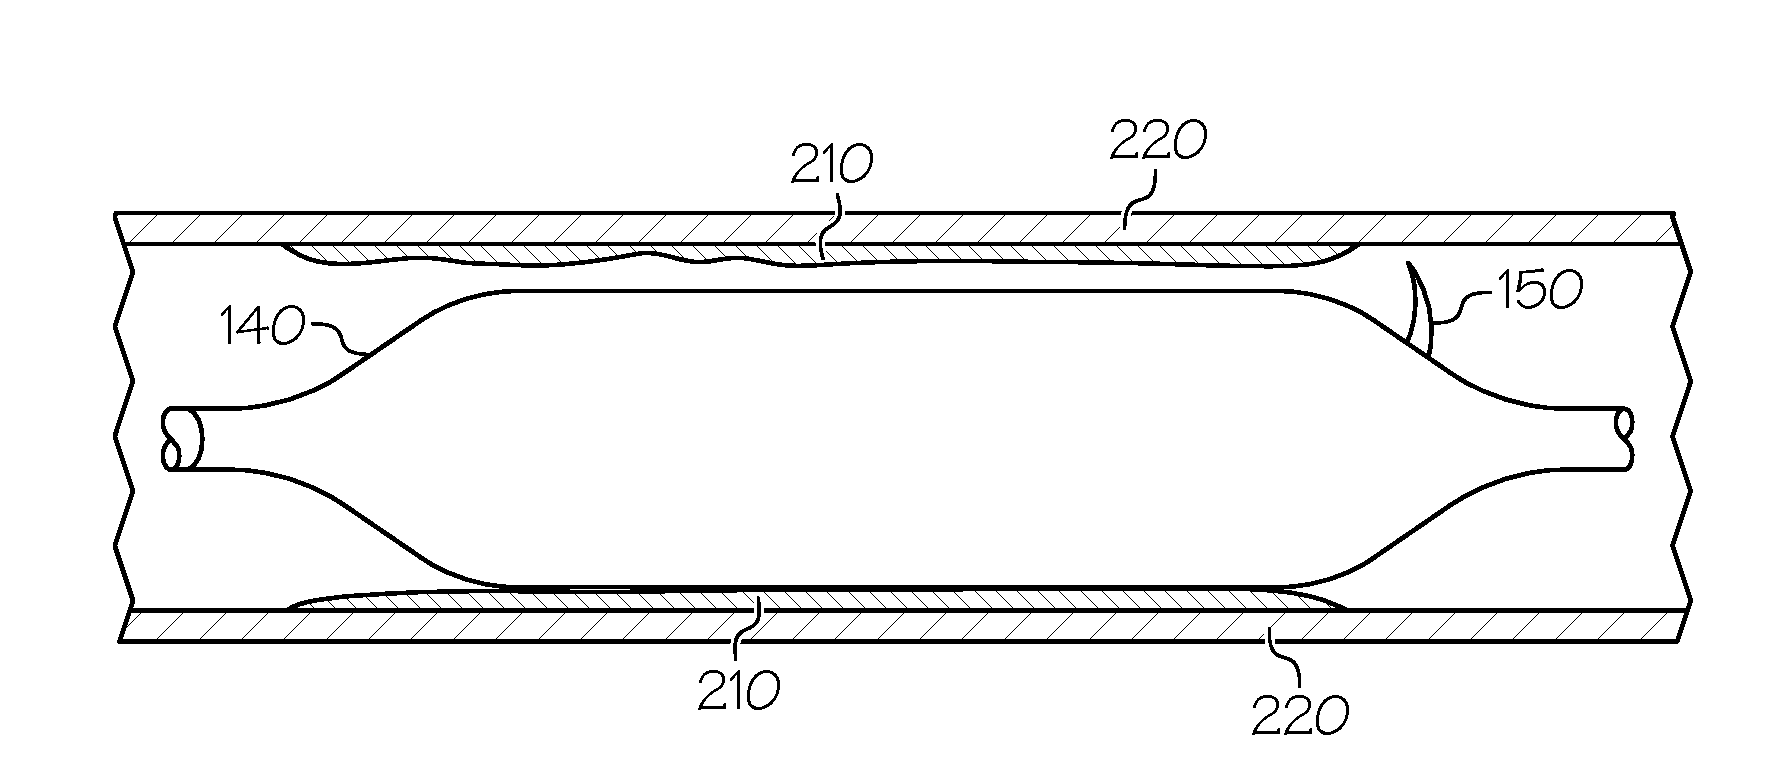 Intravascular catheter balloon device having a tool for atherectomy or an incising portion for atheromatous plaque scoring